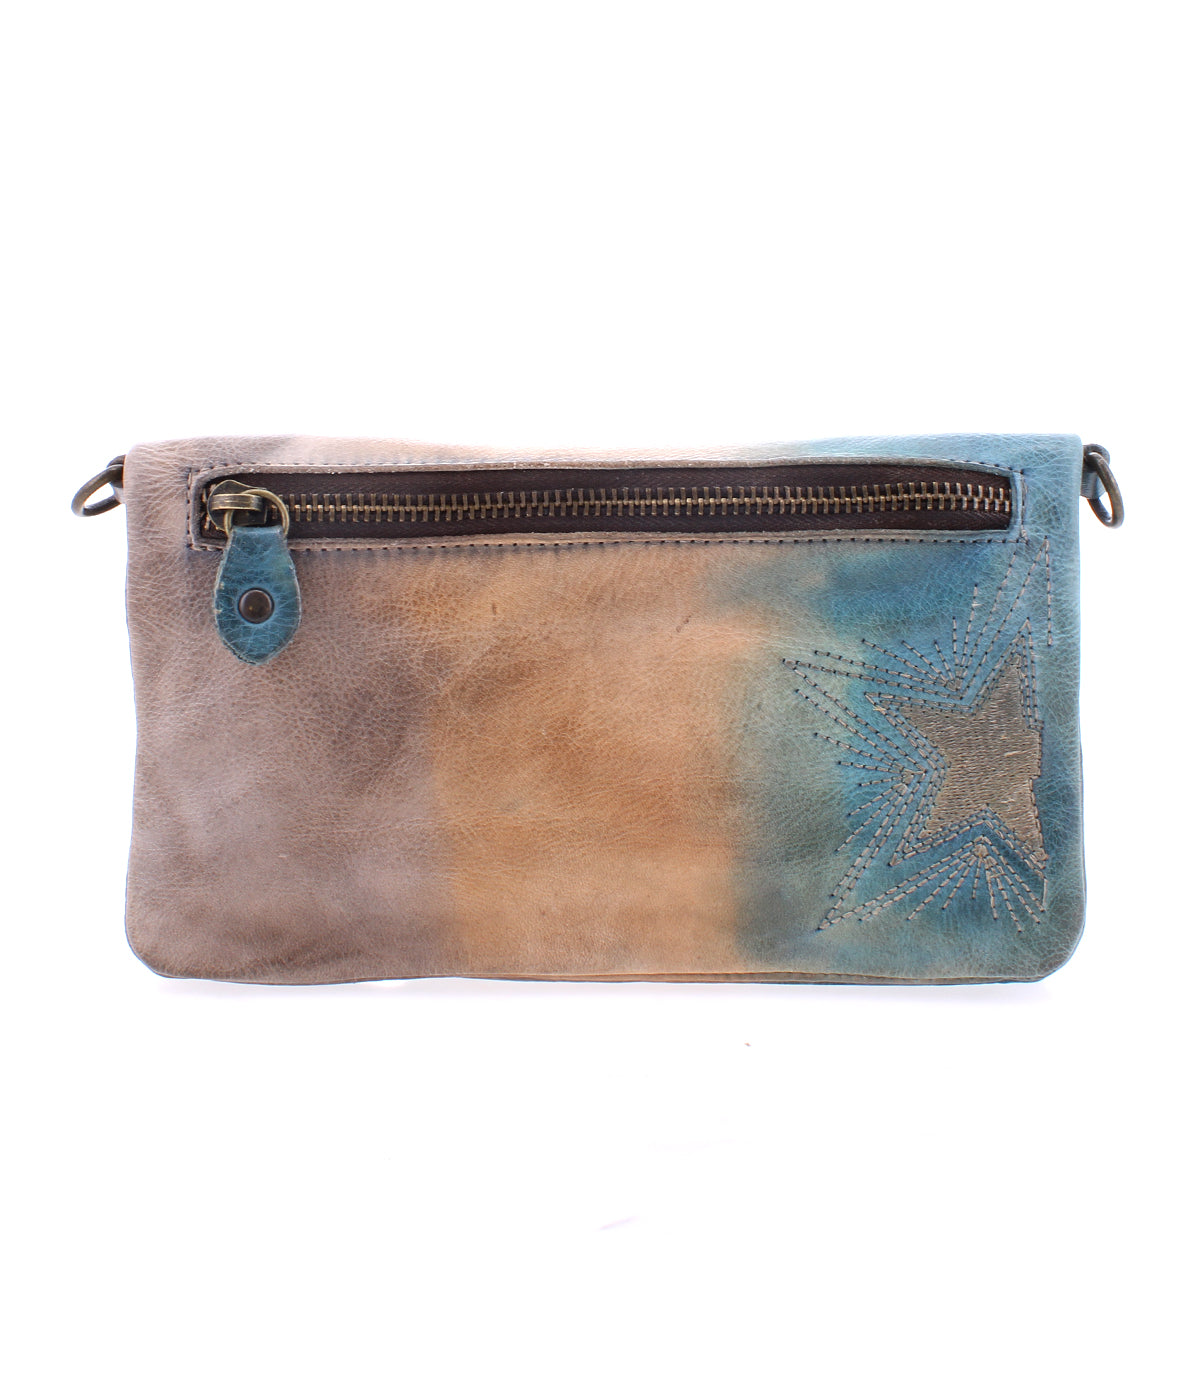 A versatile blue and brown leather clutch bag with an embroidered star, perfect for adding a touch of Bed Stu Cadence Speed to any outfit.